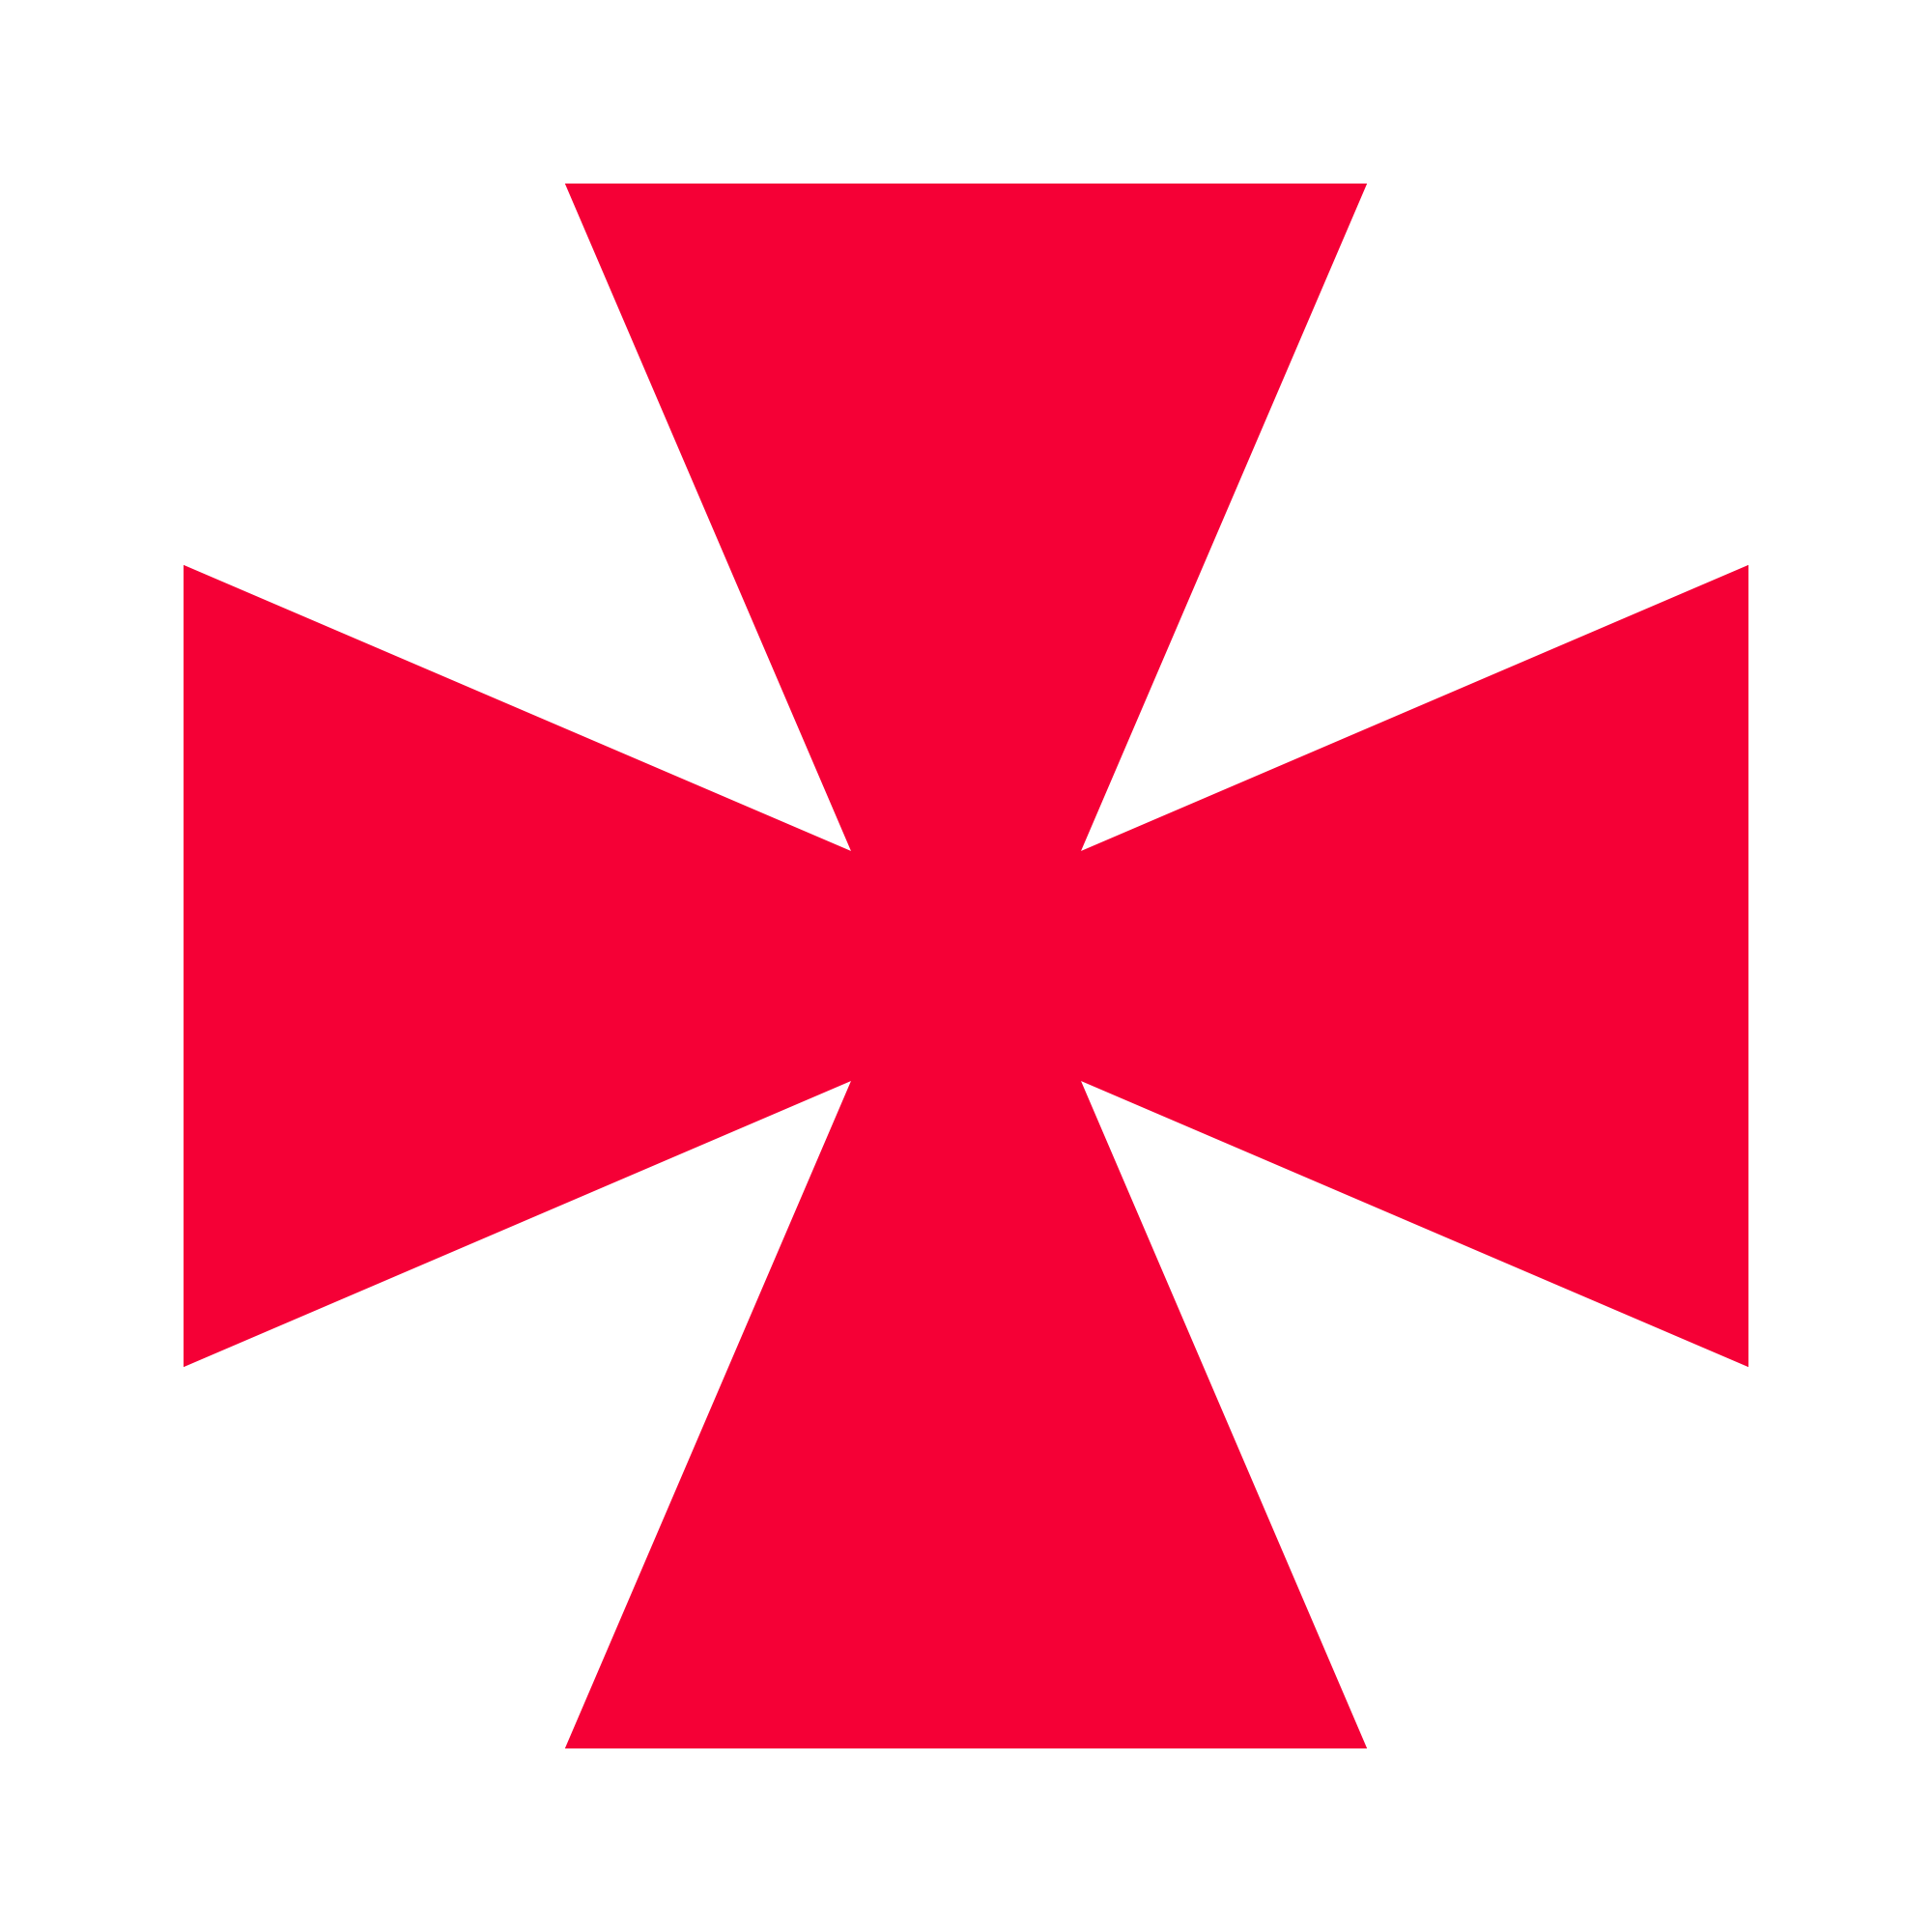 free clipart red cross symbol - photo #48